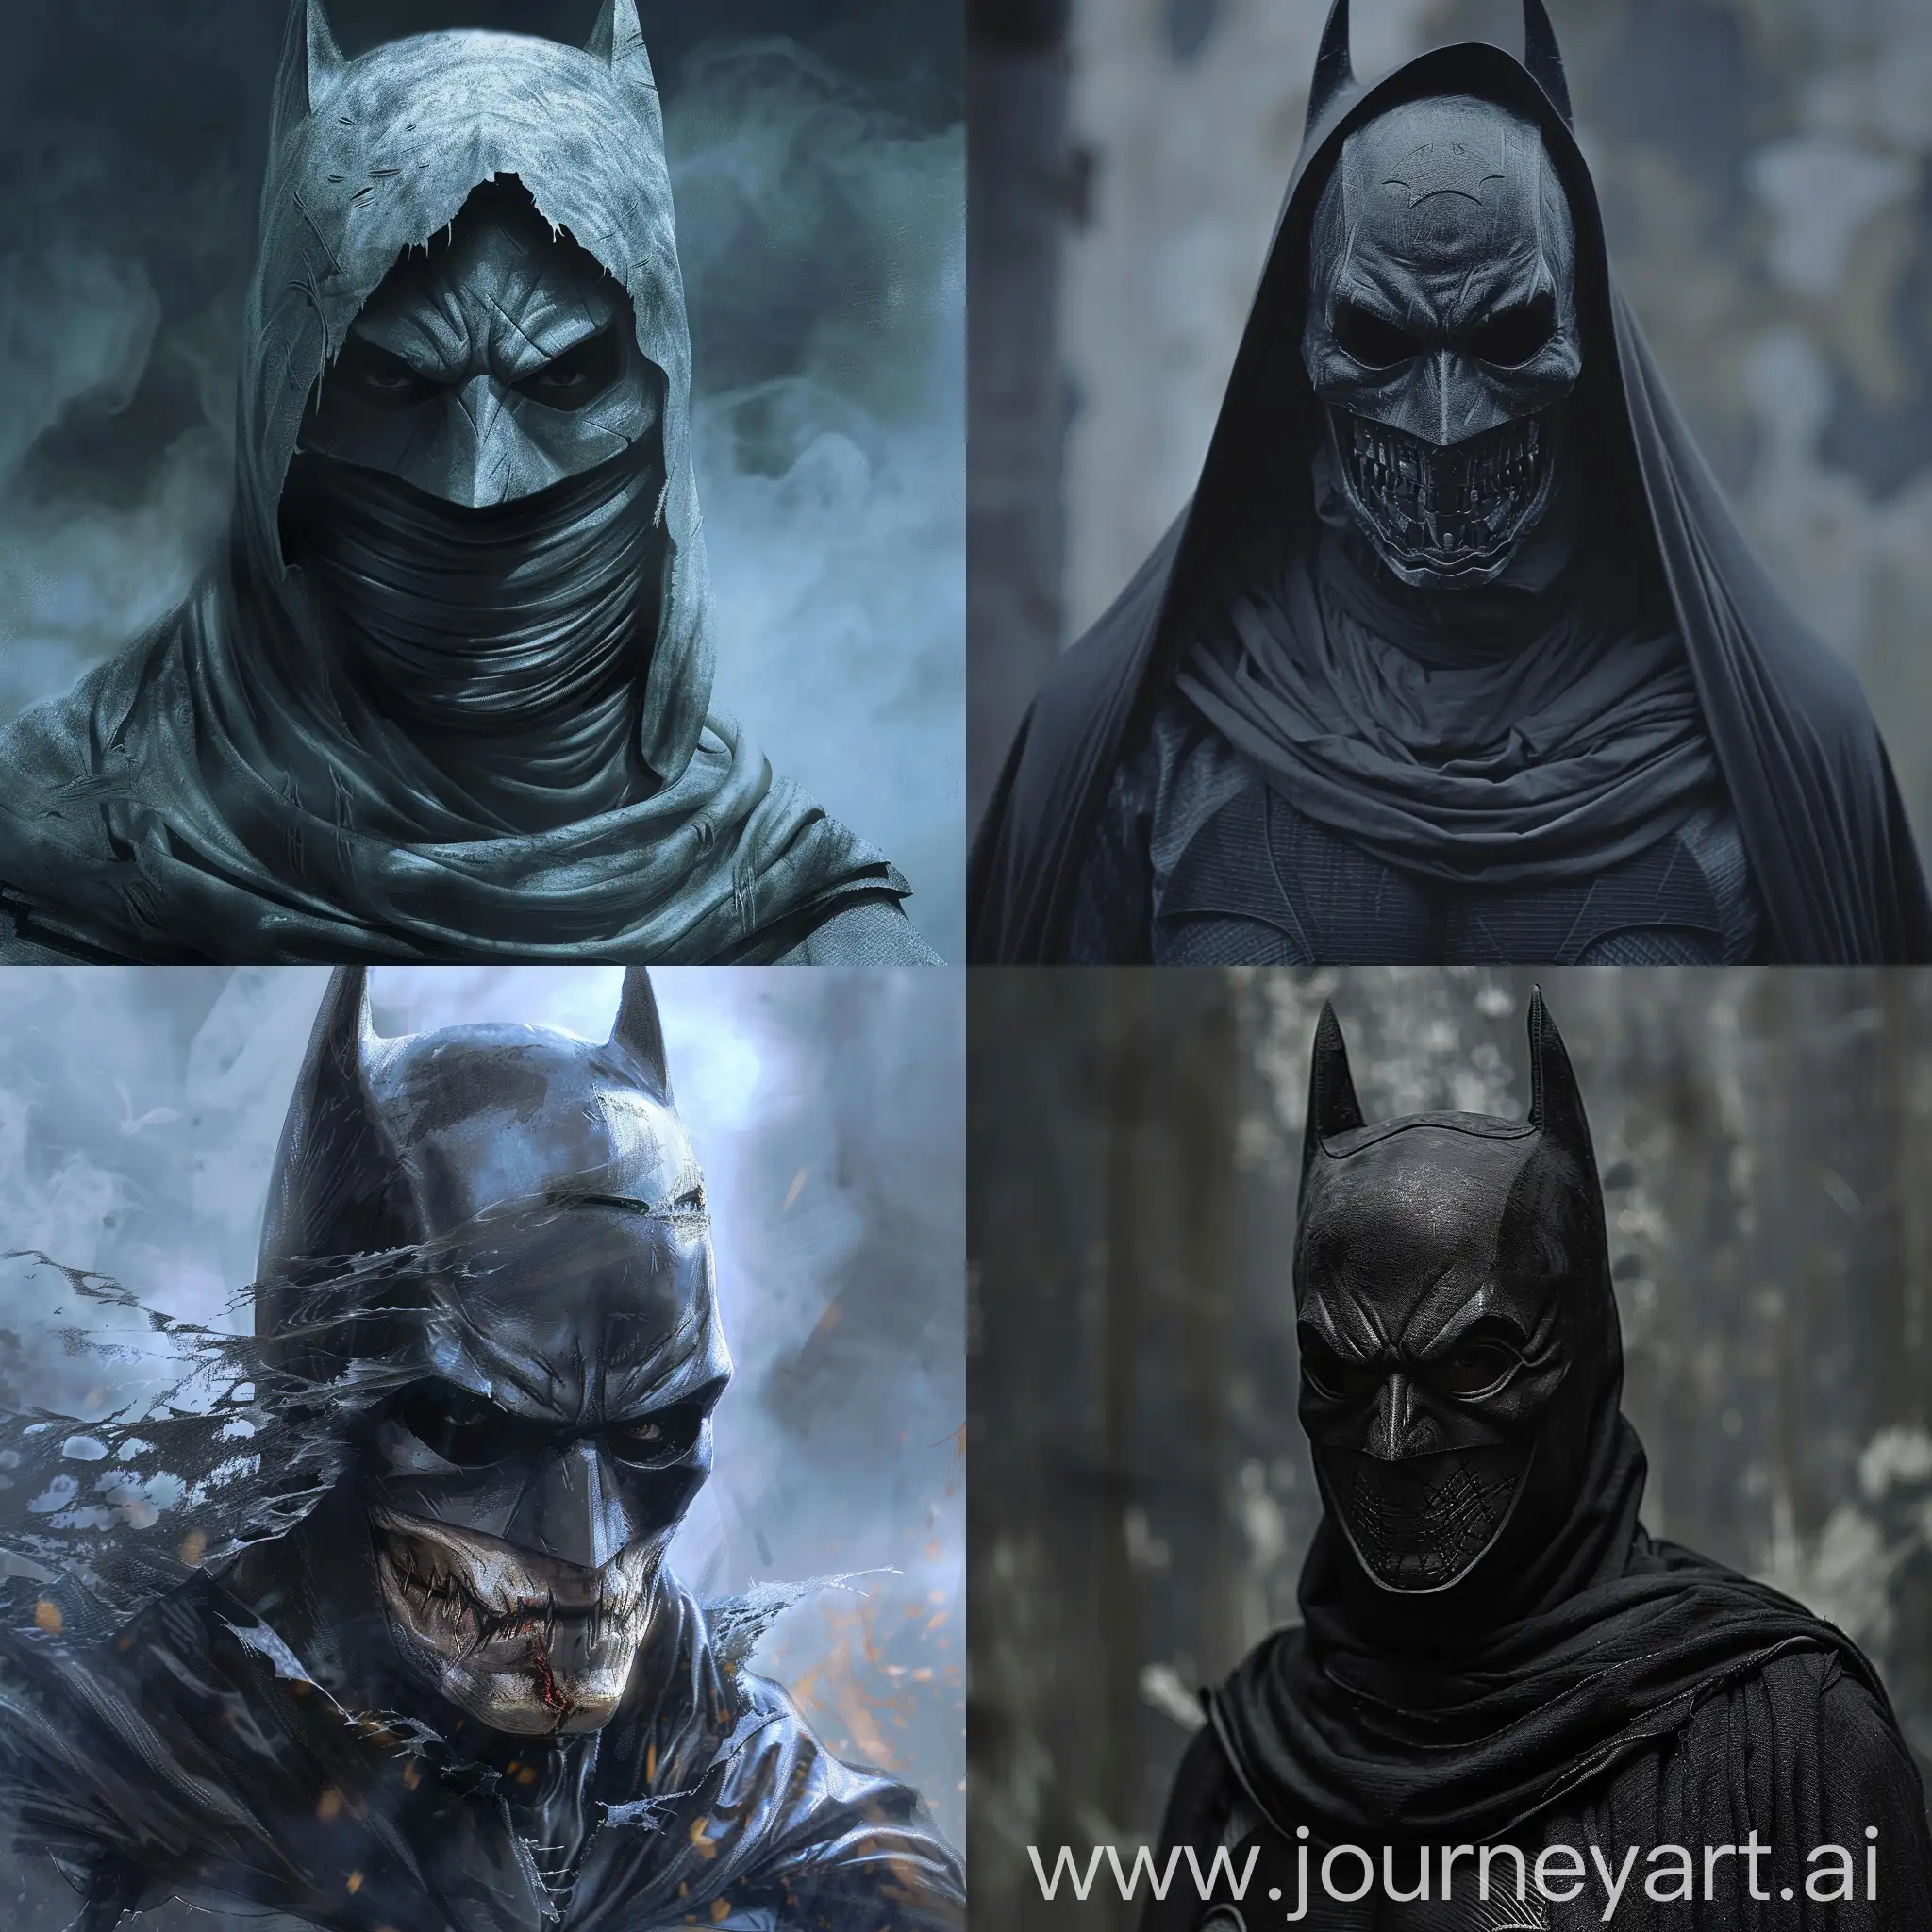 Dark-Knight-of-the-Afterlife-Grim-Reaper-in-Batman-Mask